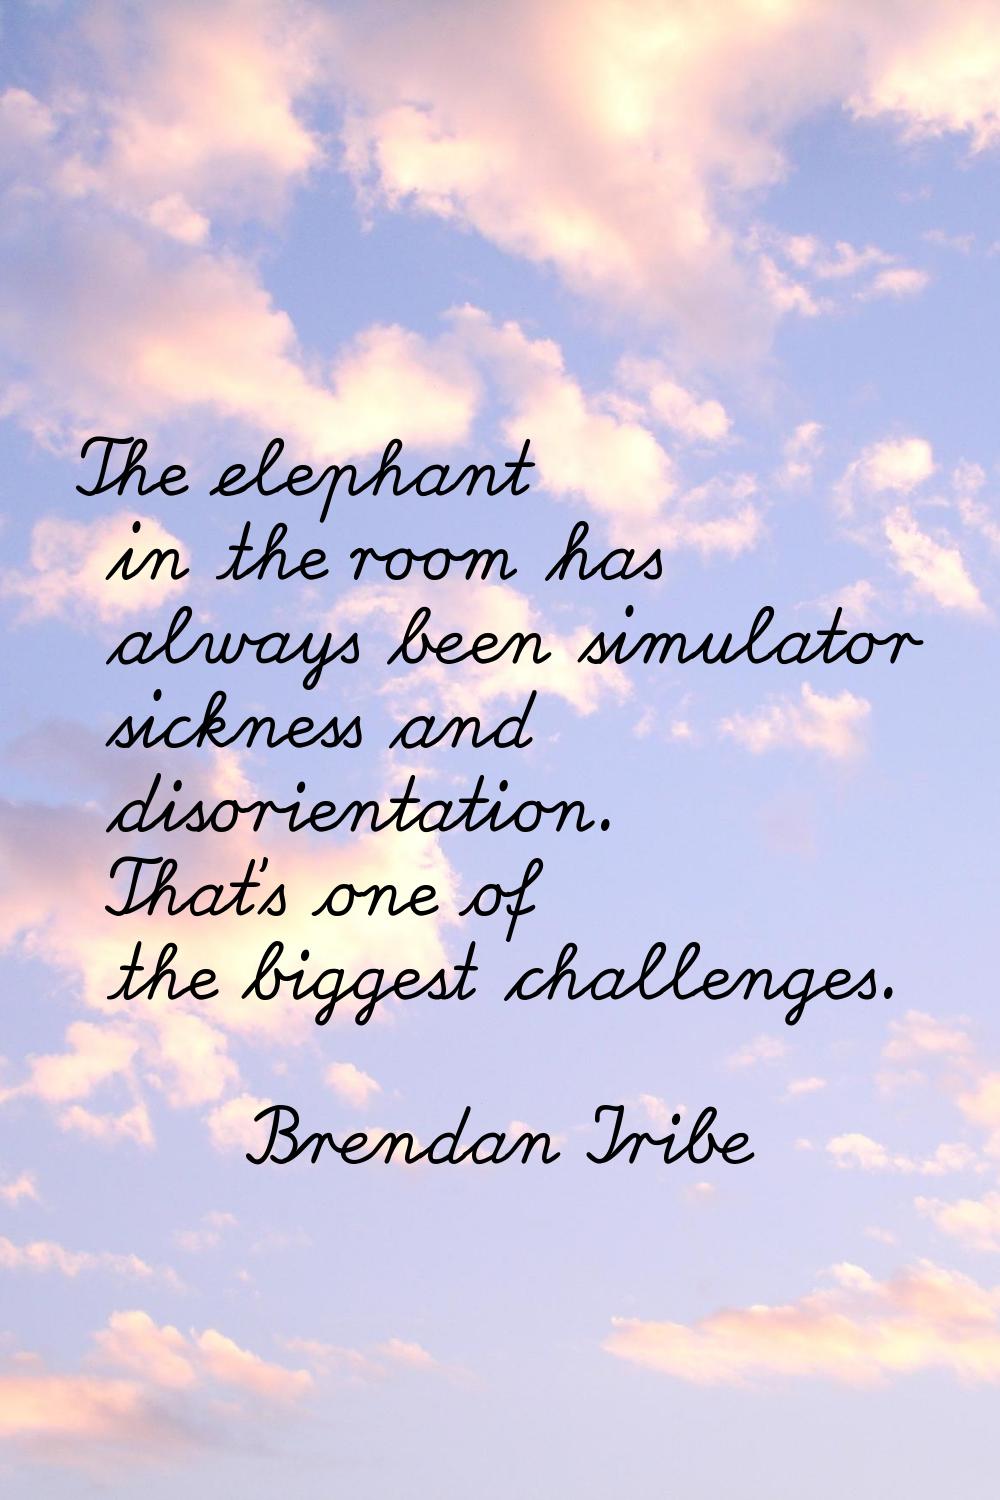 The elephant in the room has always been simulator sickness and disorientation. That's one of the b